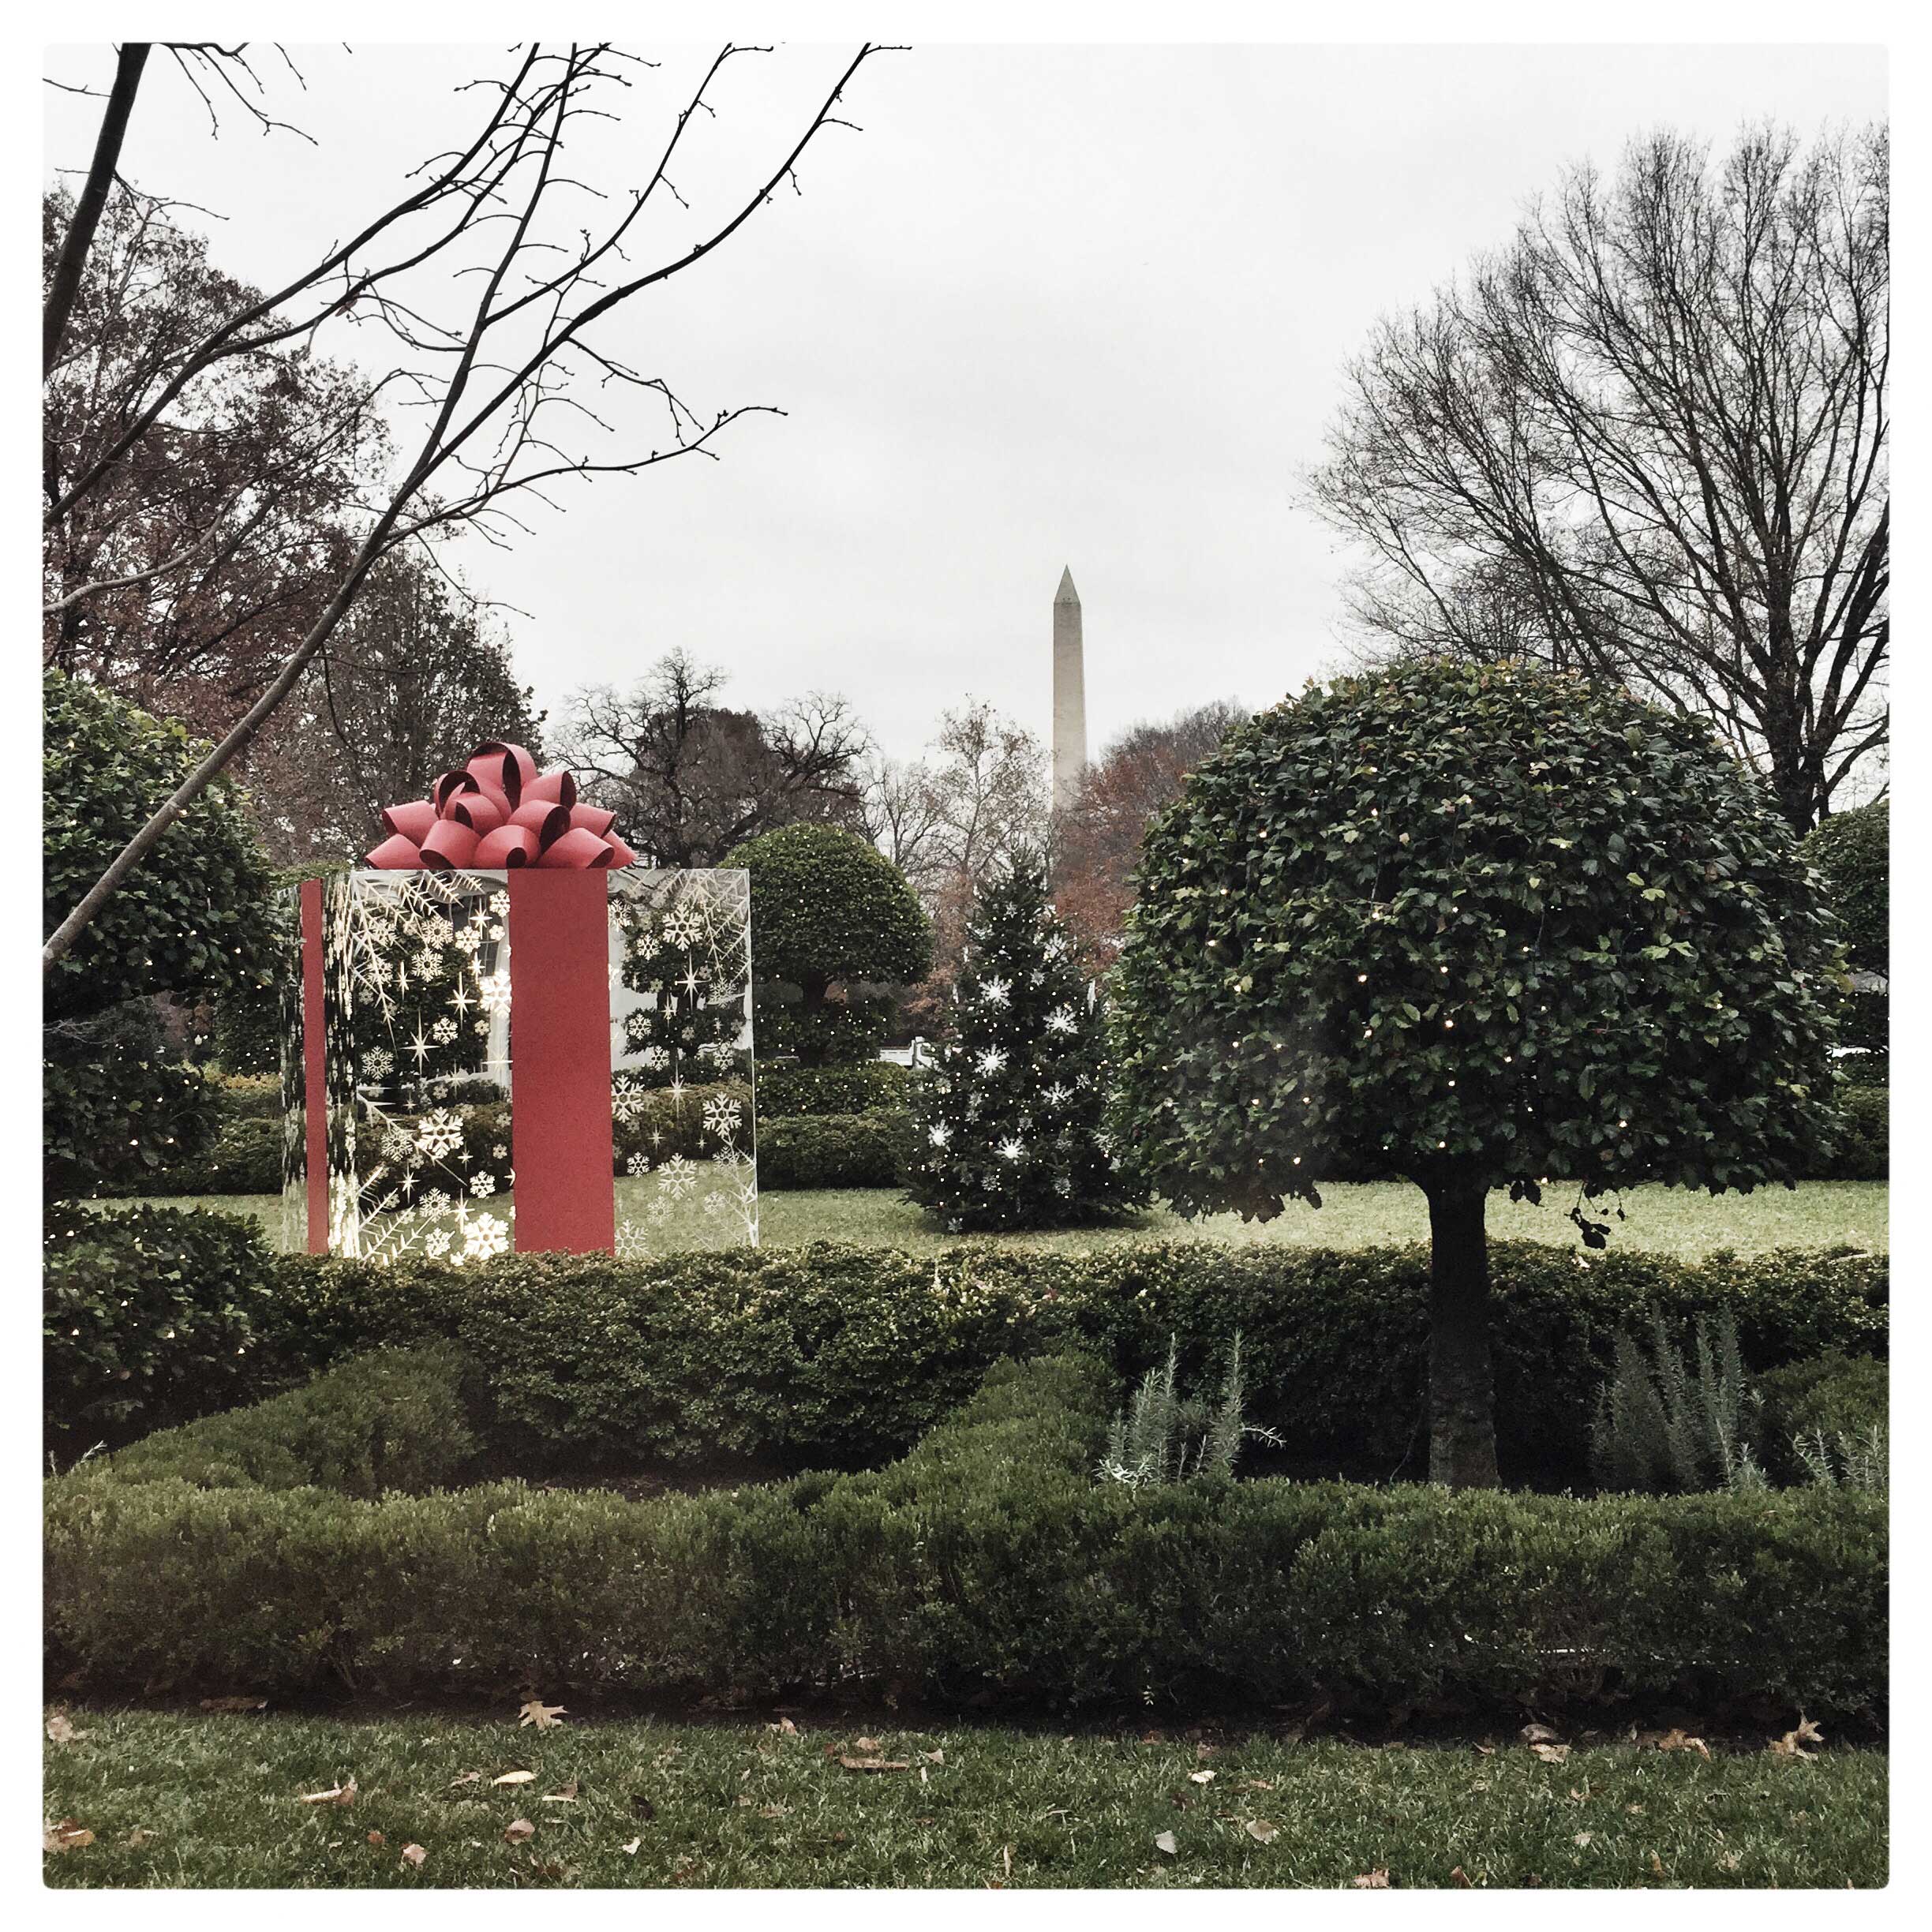 Holiday decorations in the Jacqueline Kennedy Garden of of the White House.